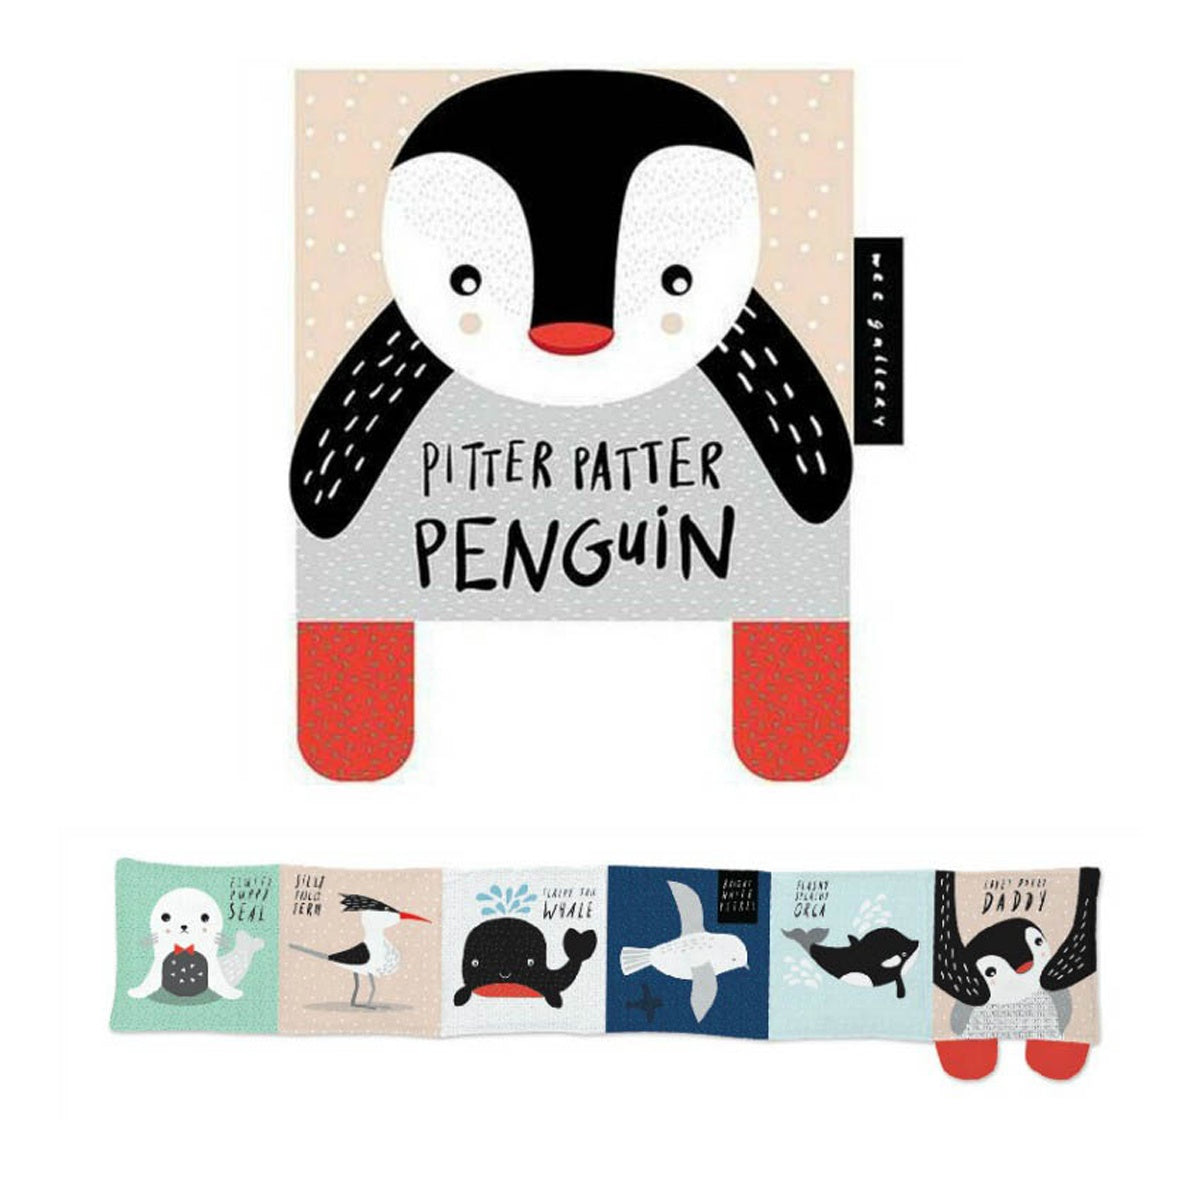 Wee Gallery Cloth Books: Pitter Patter Penguin